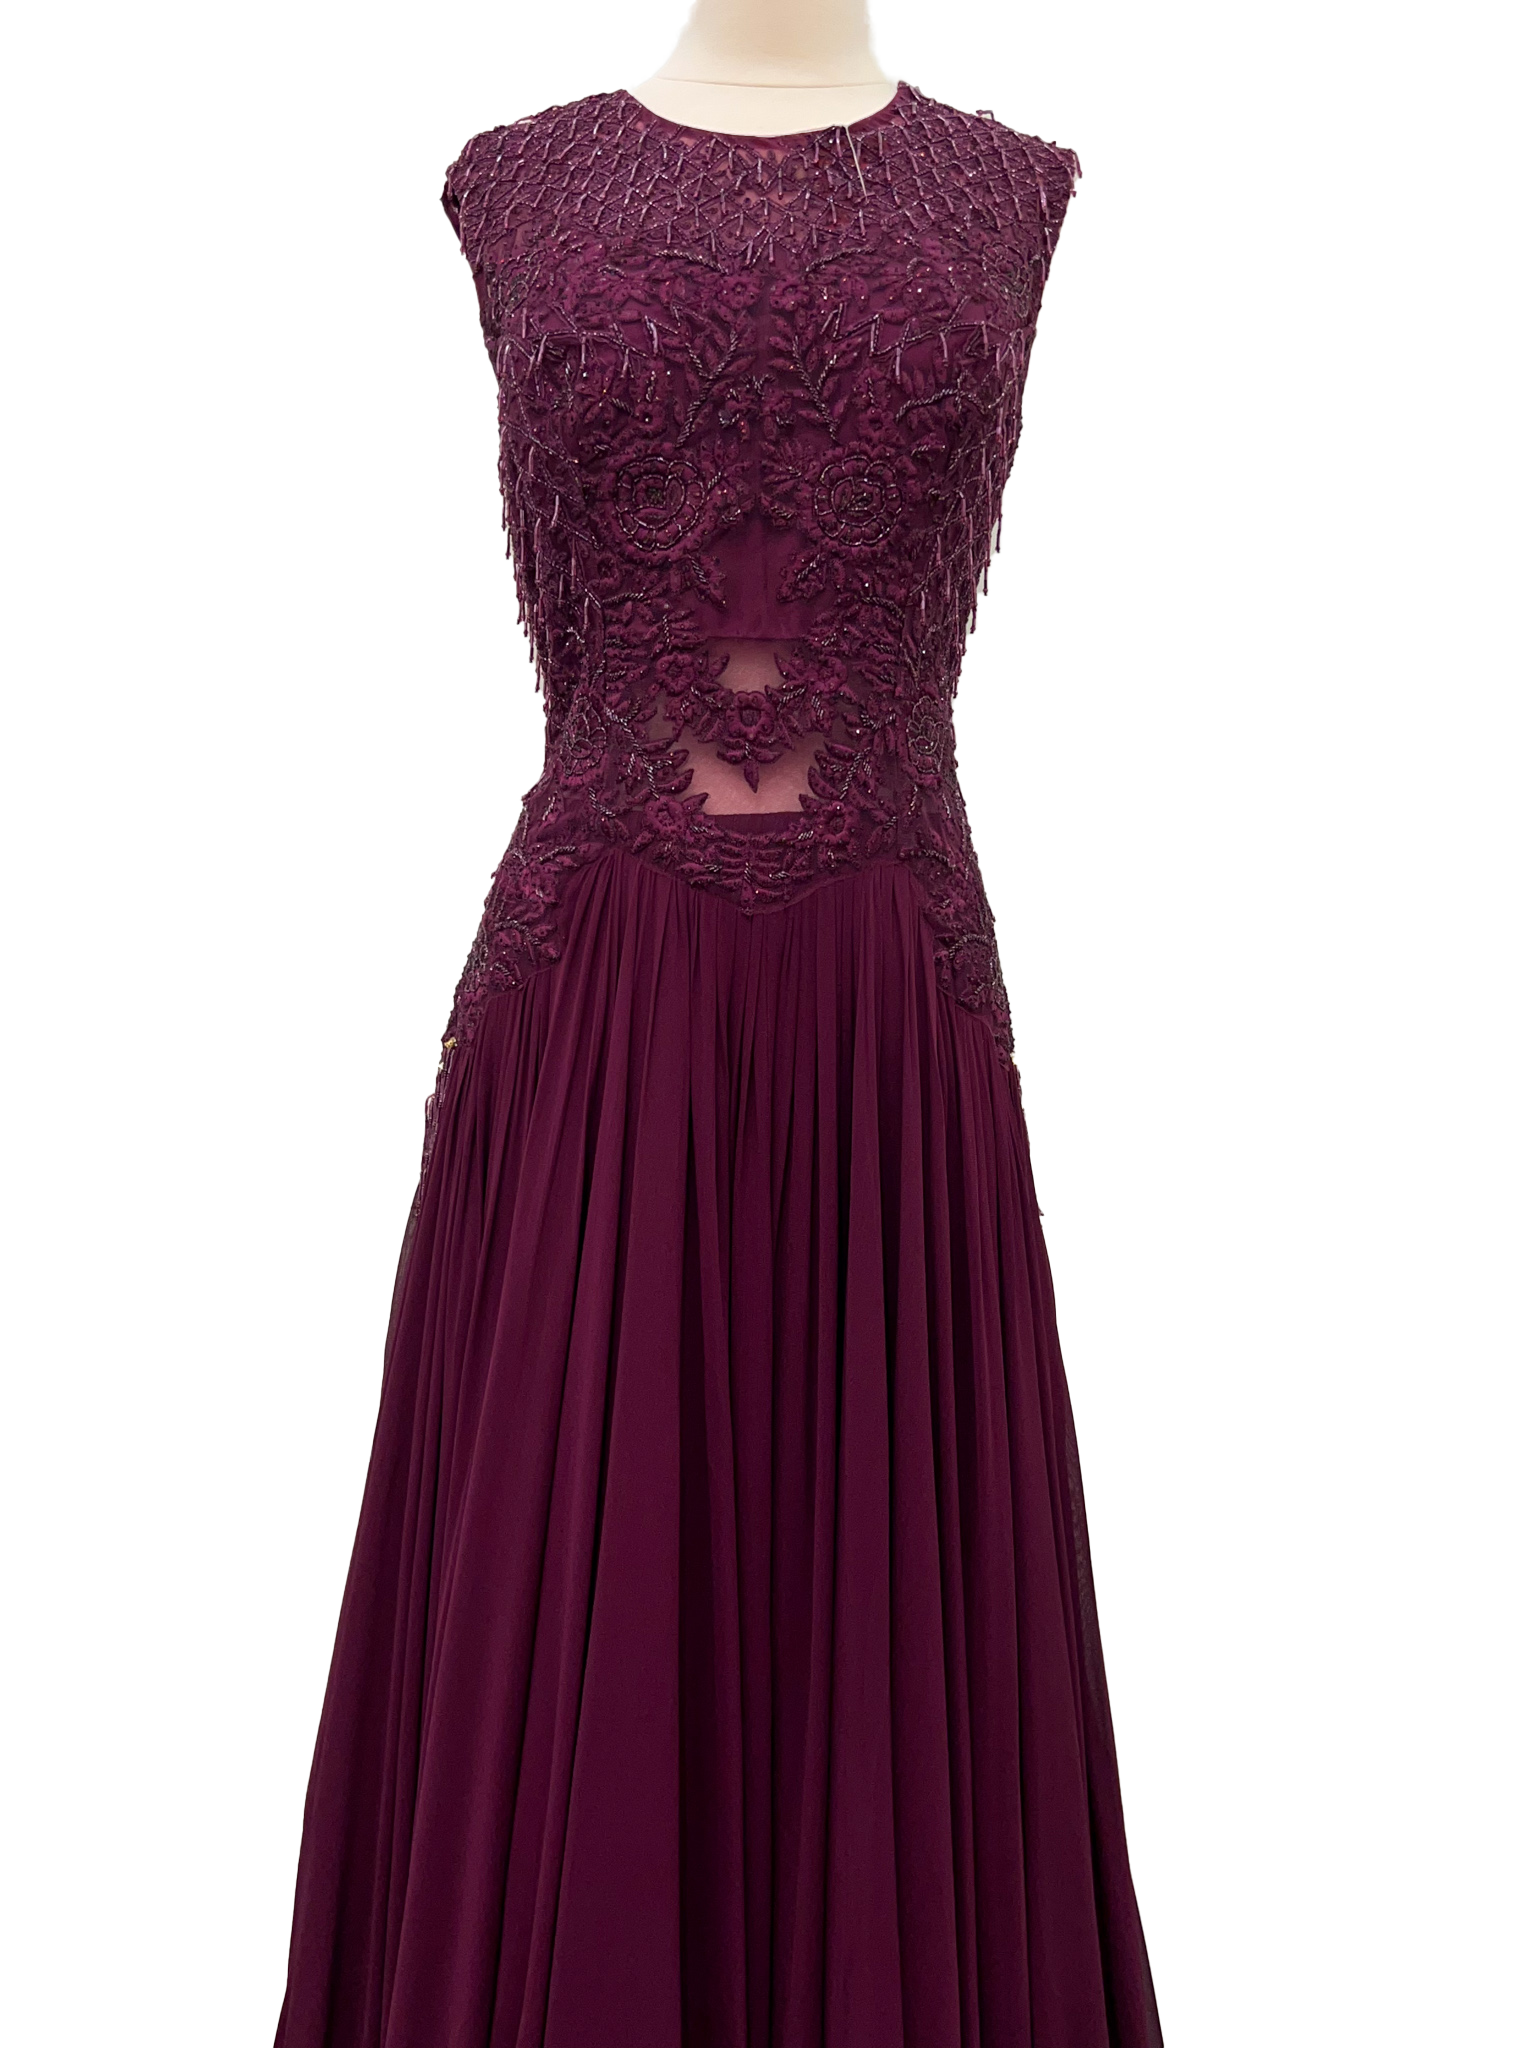 Fancy Wine Color Gown With Full Sleeve Work – vastracloth